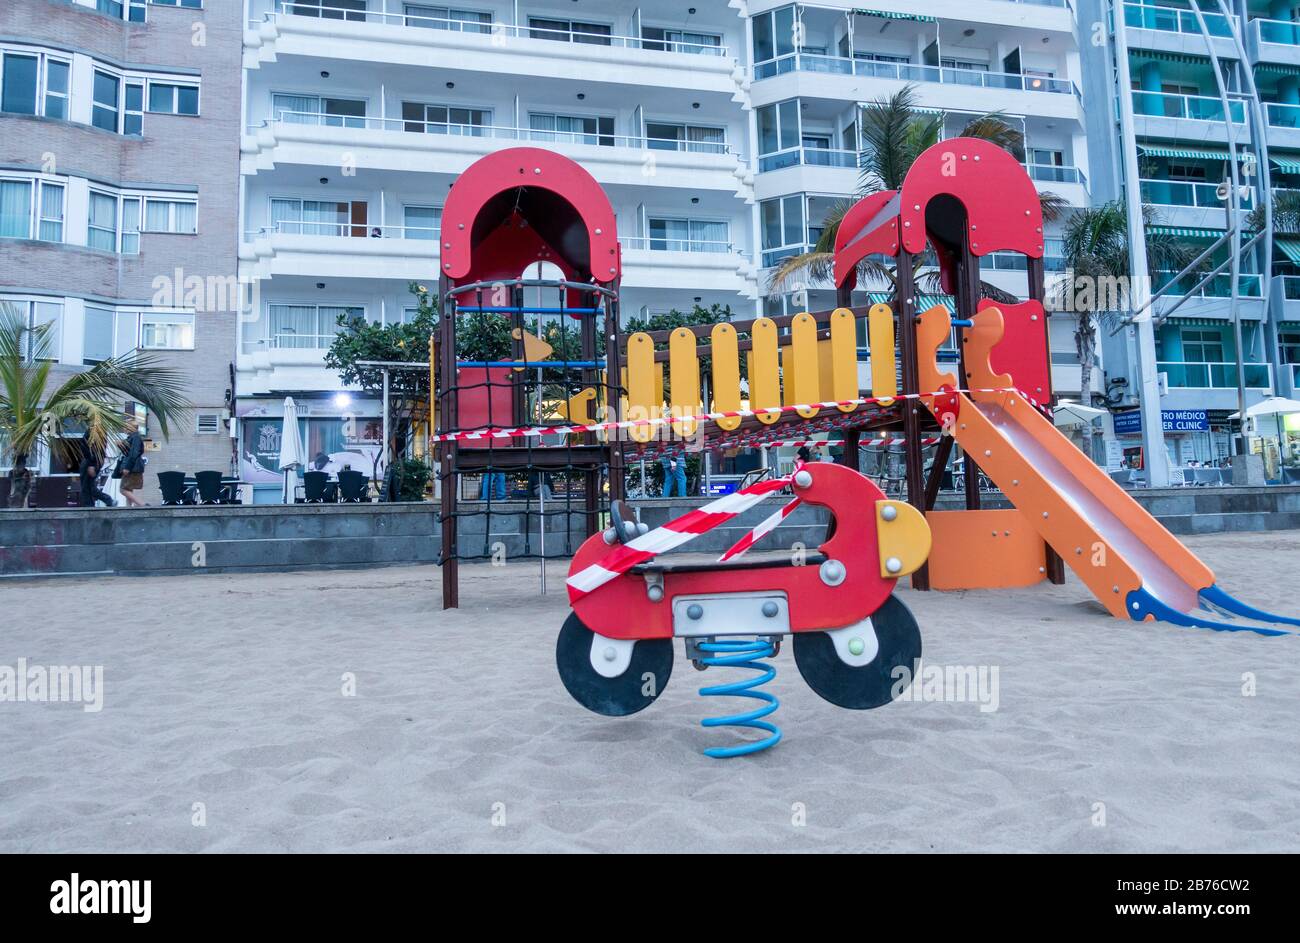 Las Palmas, Gran Canaria, Canary Islands, Spain. 13th March 2020. A beach playground is is taped off on the city beach in Las Palmas on Gran Canaria to prevent the spread of Coronavirus as the government delares a state of emergency as Coronavirus cases continue to rise in Spain. The Impact of travel restrictions and reduced number of tourists is a major concern for the Canary Islands. Credit: Alan Dawson/Alamy Live News Stock Photo